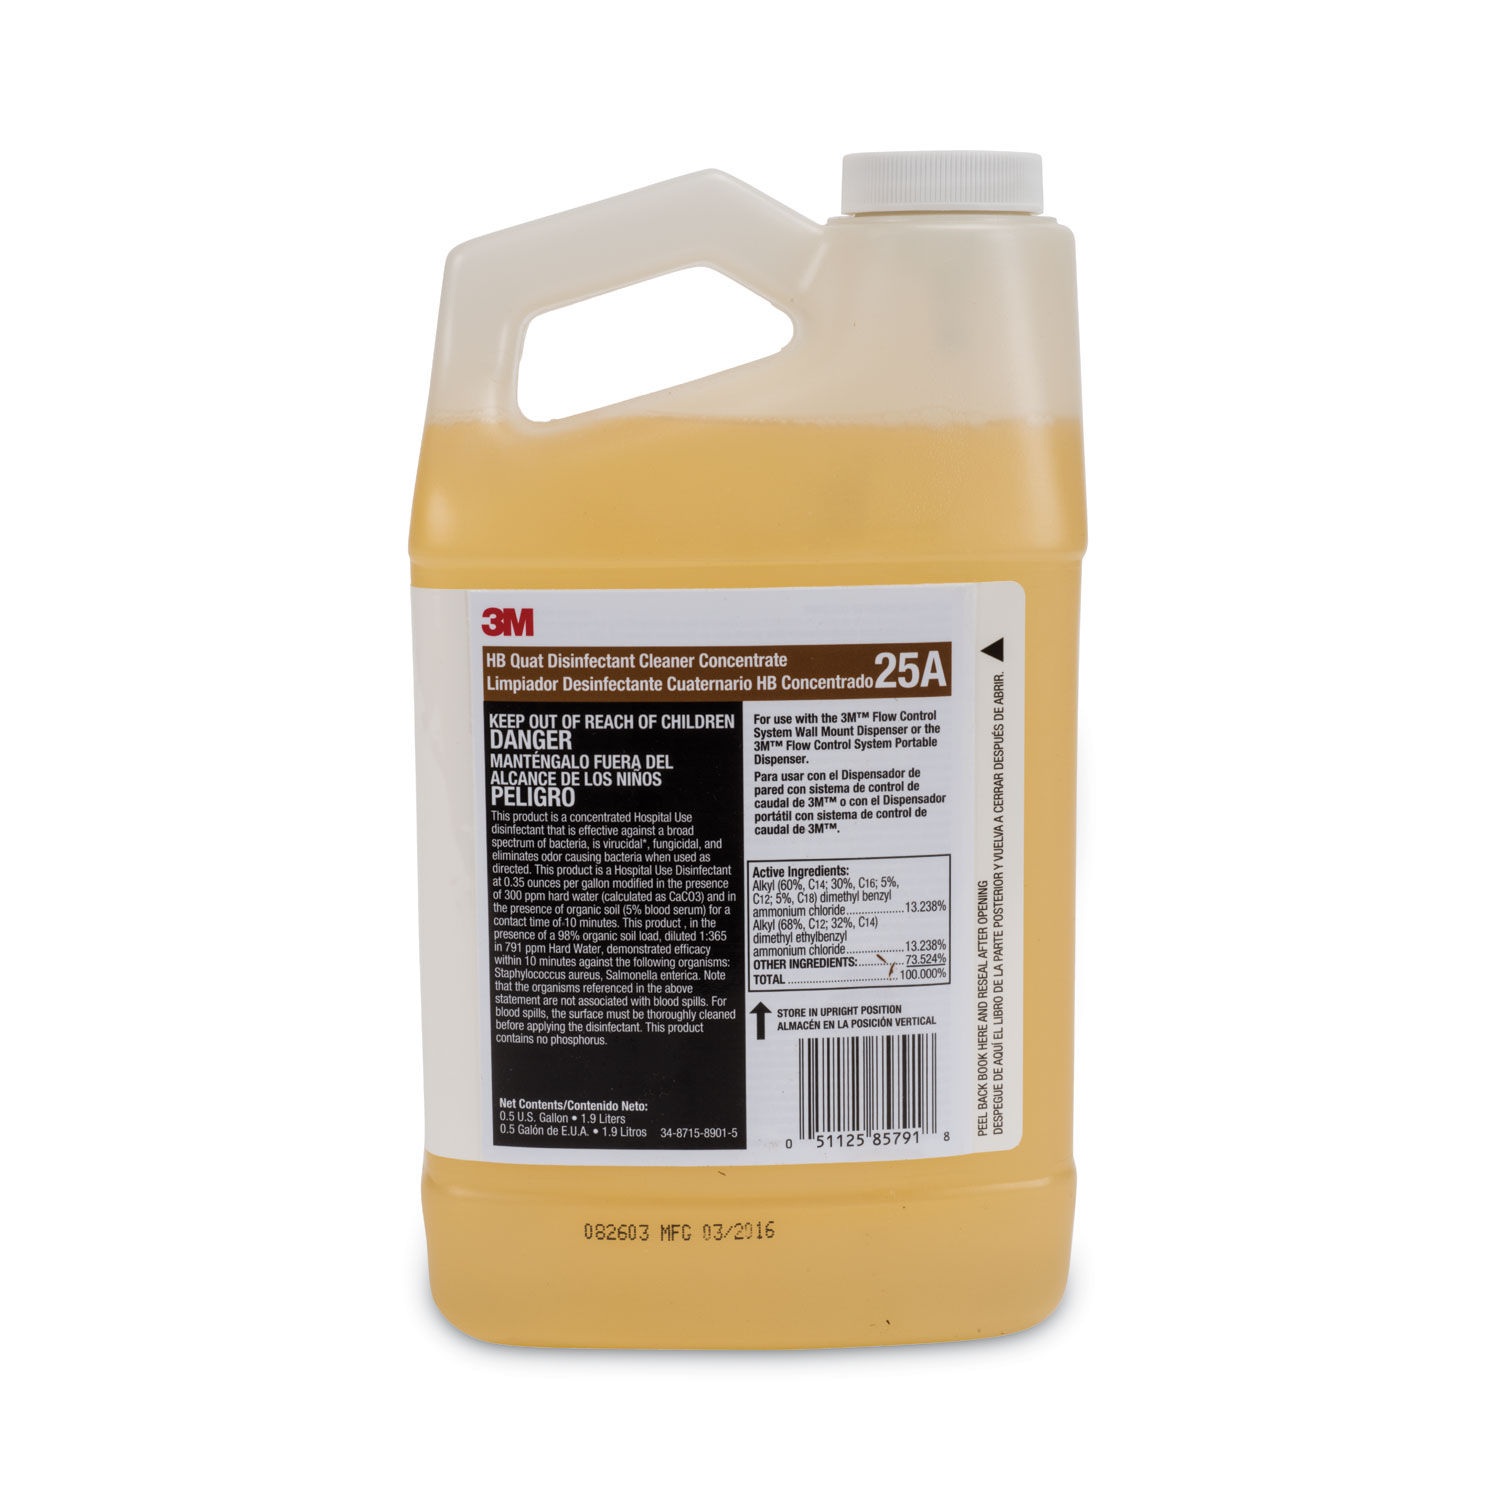 HB Quat Disinfectant Cleaner Concentrate For Flow Control System and Twist 'n Fill System, 1 gal Bottle